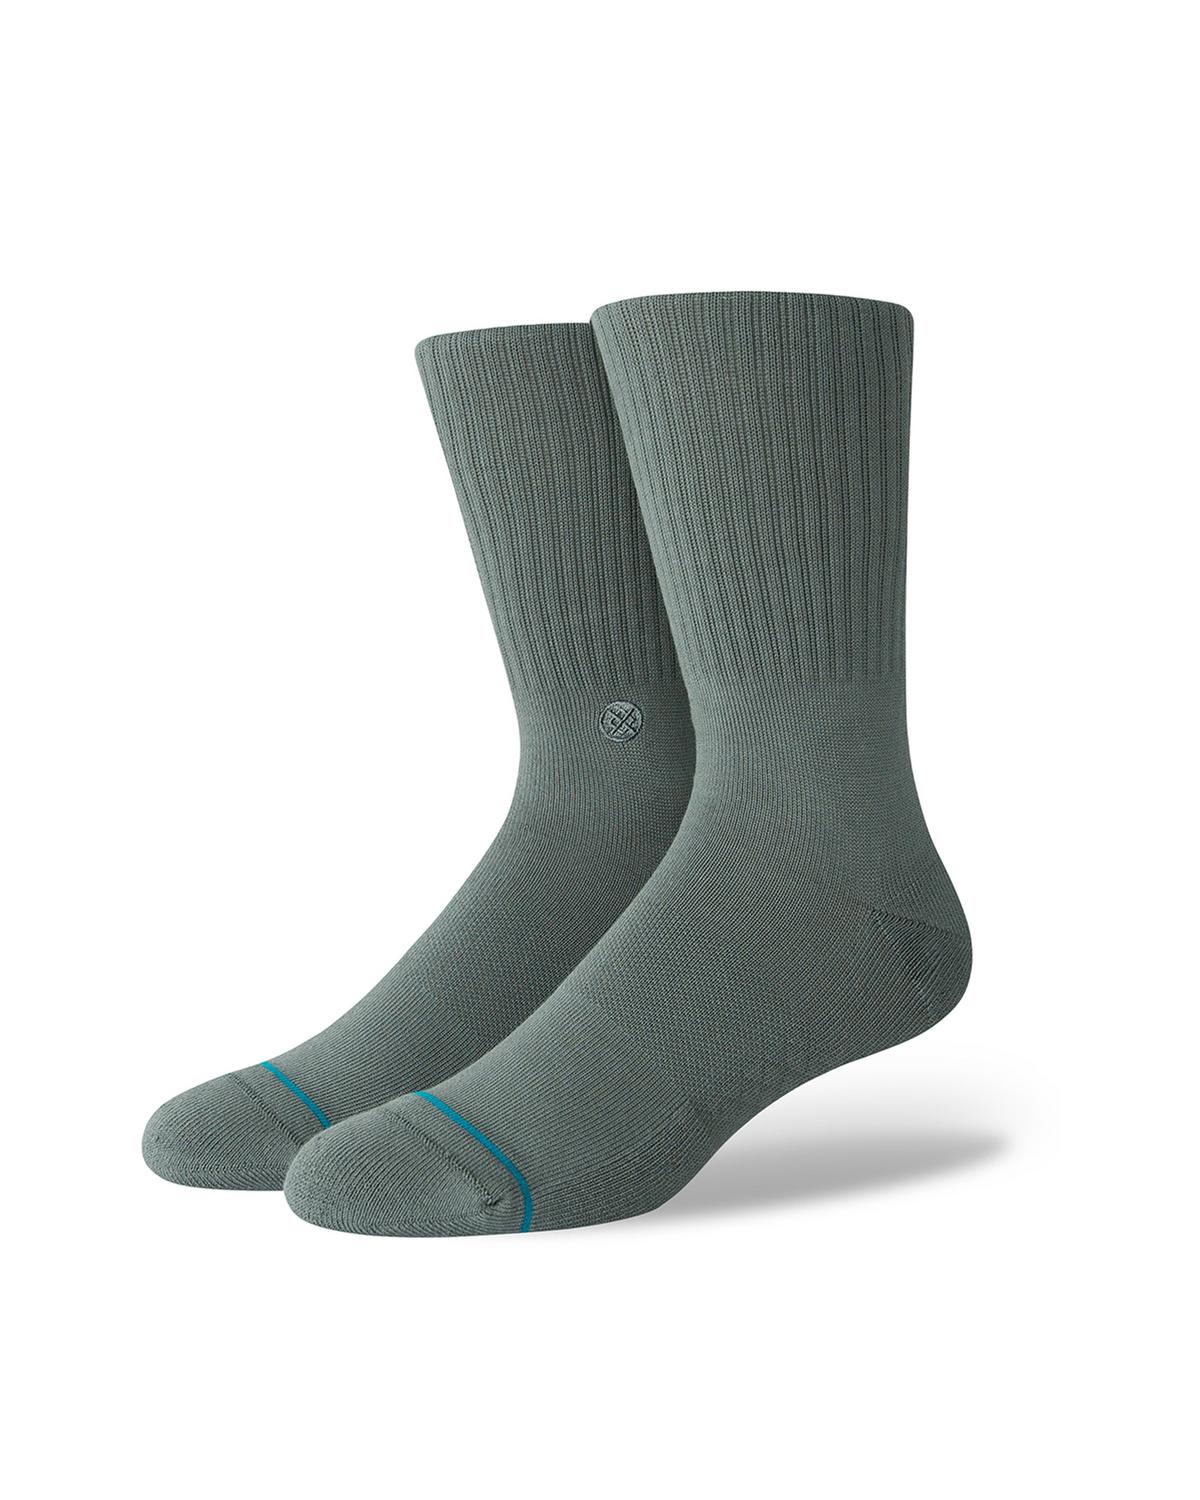 STANCE Icon Crew Socks - 3 Pack  -  Green